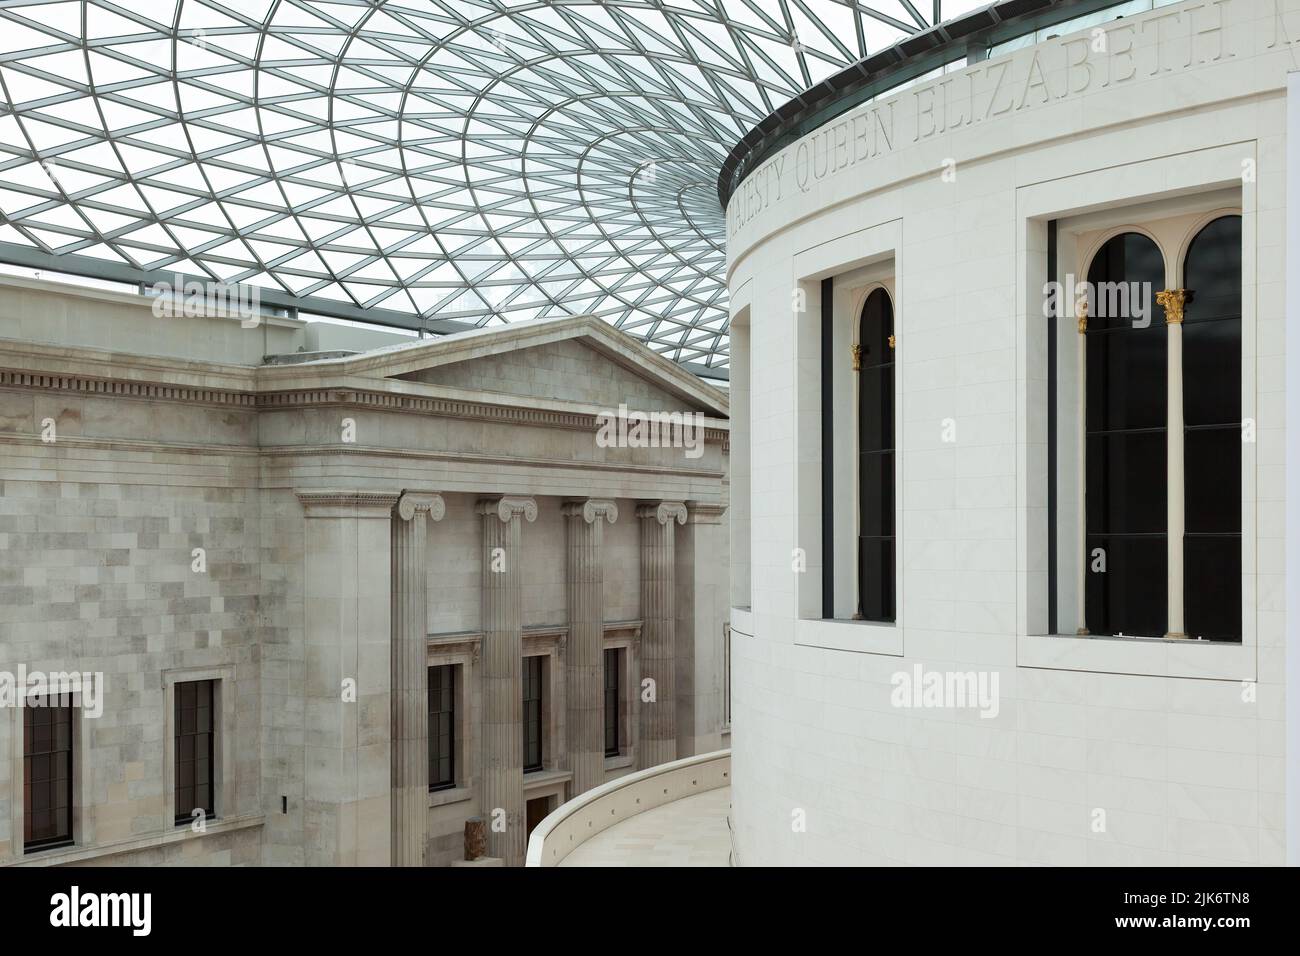 LONDON, UK - NOVEMBER 6 : Ceiling of the Great Court at the British Museum in London on November 6, 2012 Stock Photo